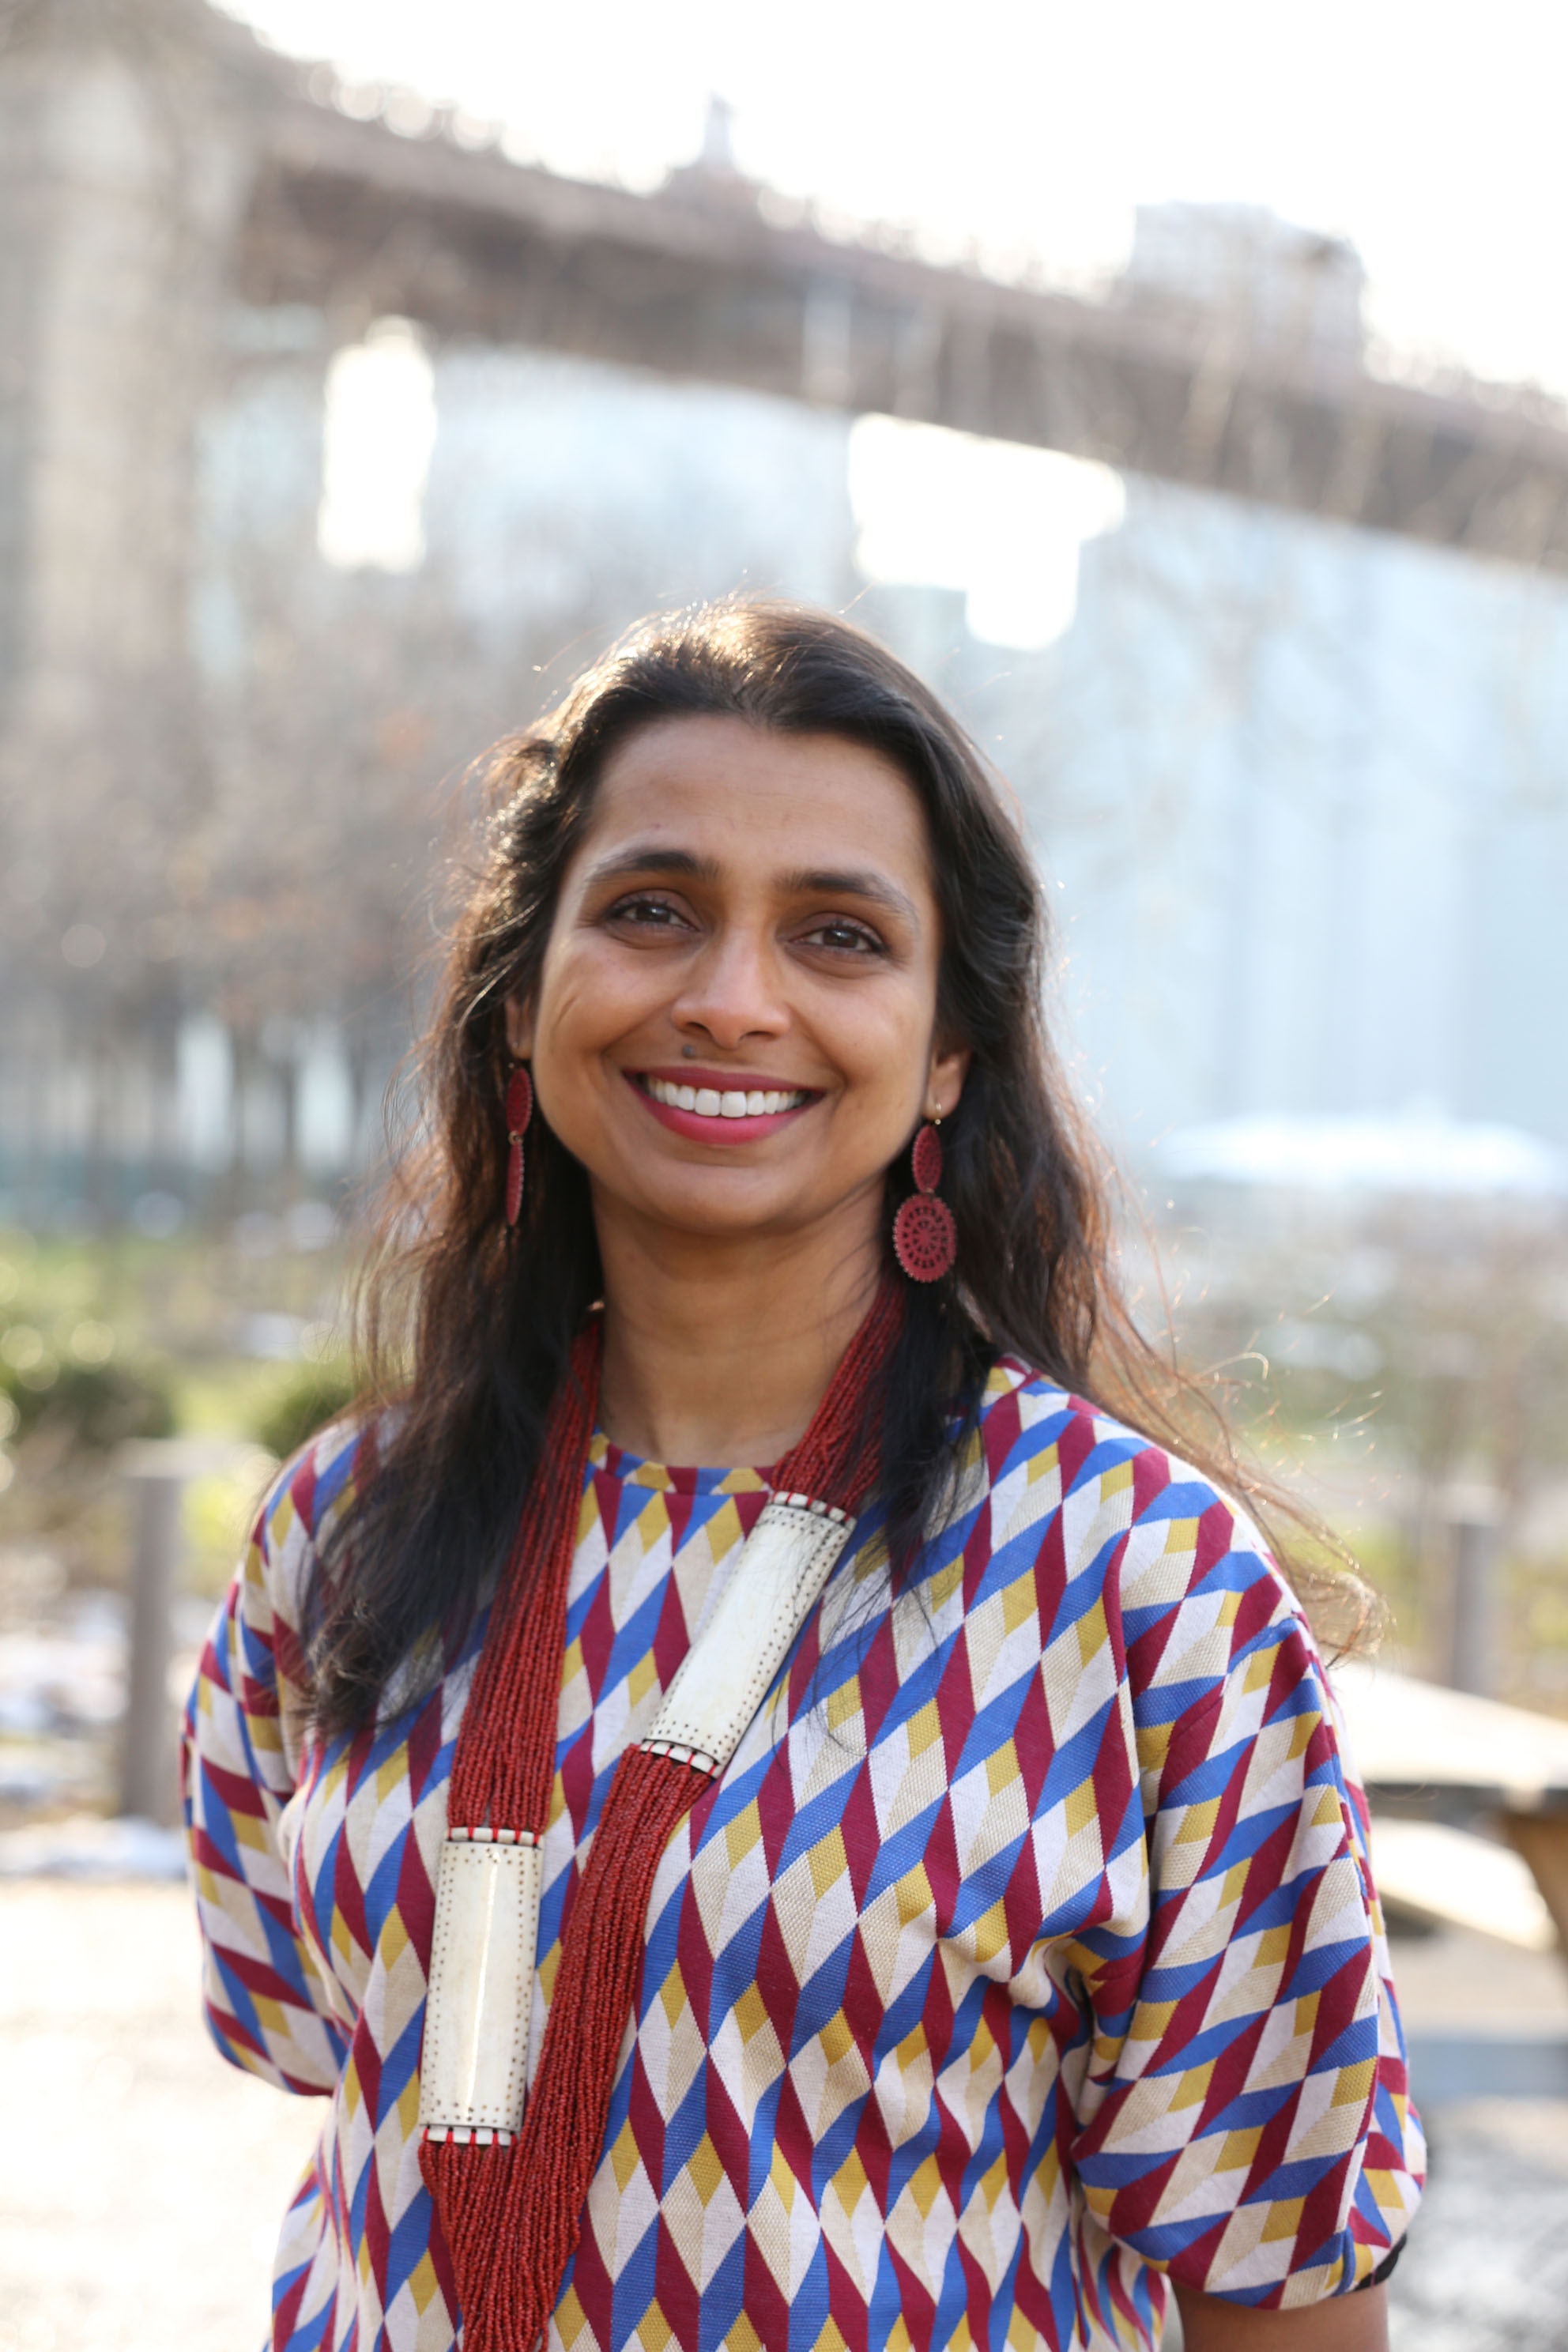 A photo of Prerana Reddy standing against the blurry background of trees and a tall bridge. Reddy wears a geometric-print shirt, red earrings, and a long, red beaded necklace.